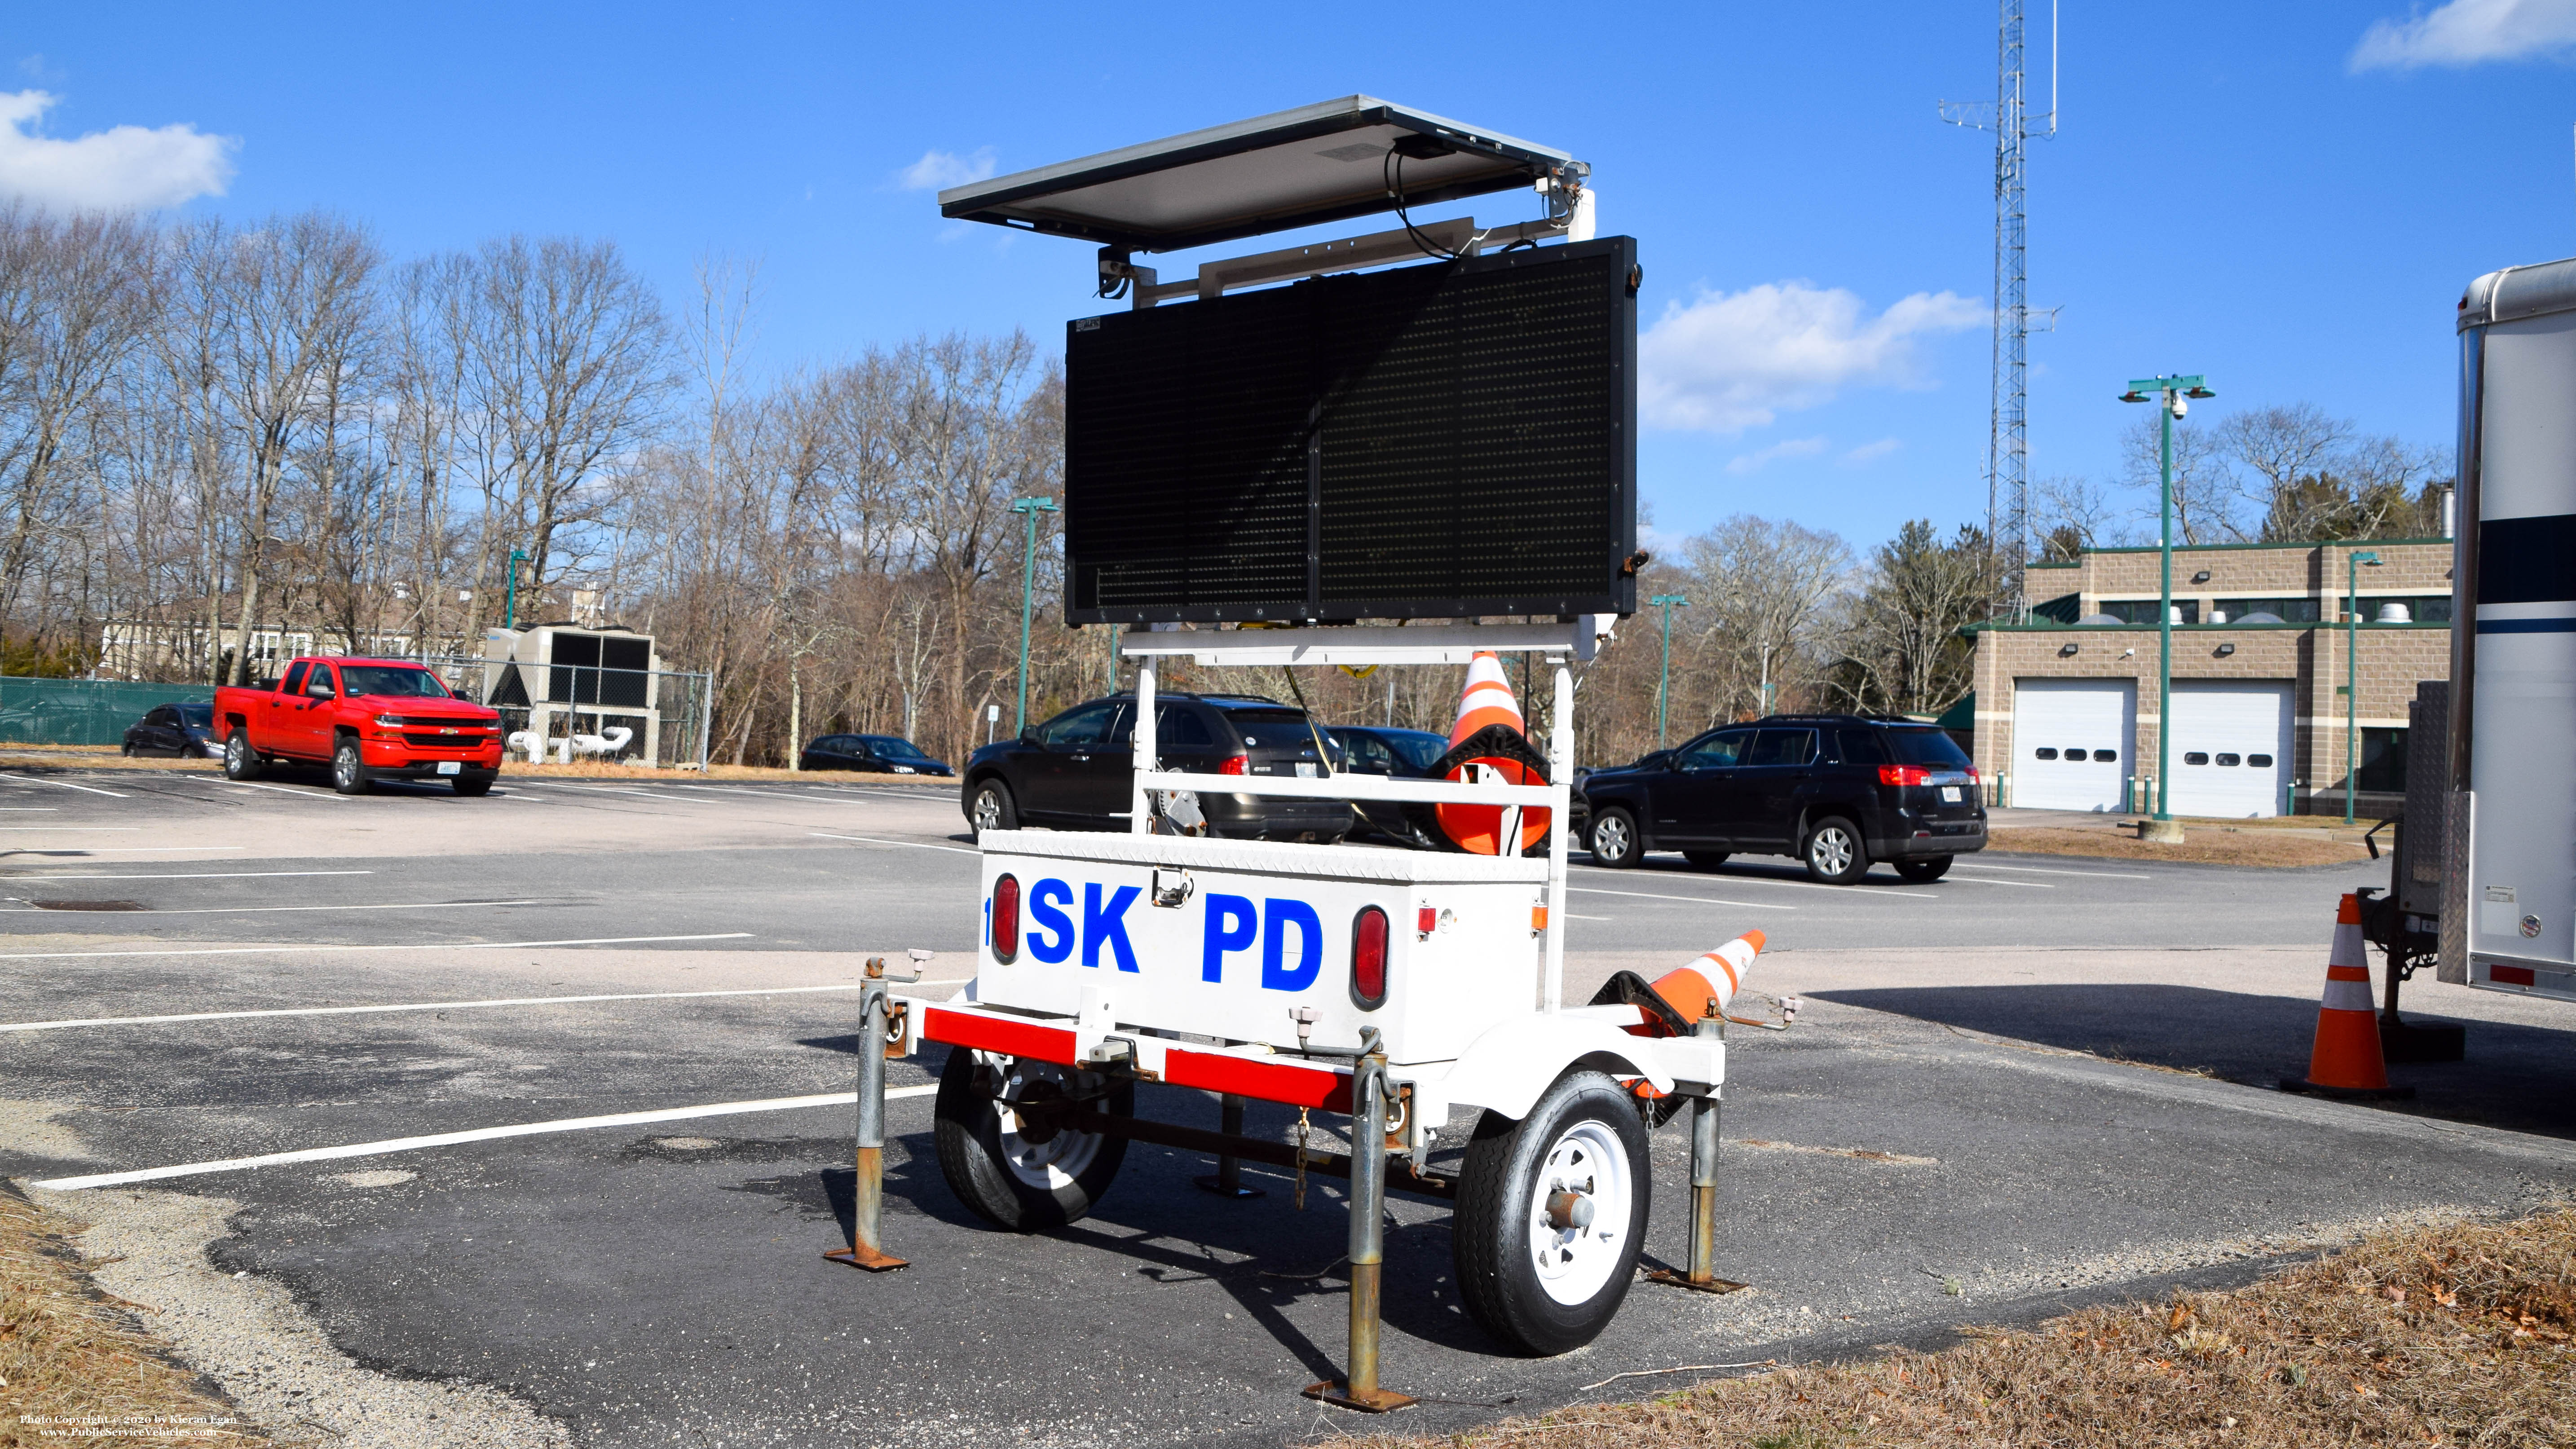 A photo  of South Kingstown Police
            Message Trailer 1, a 2006-2010 All Traffic Solutions Speed Trailer             taken by Kieran Egan